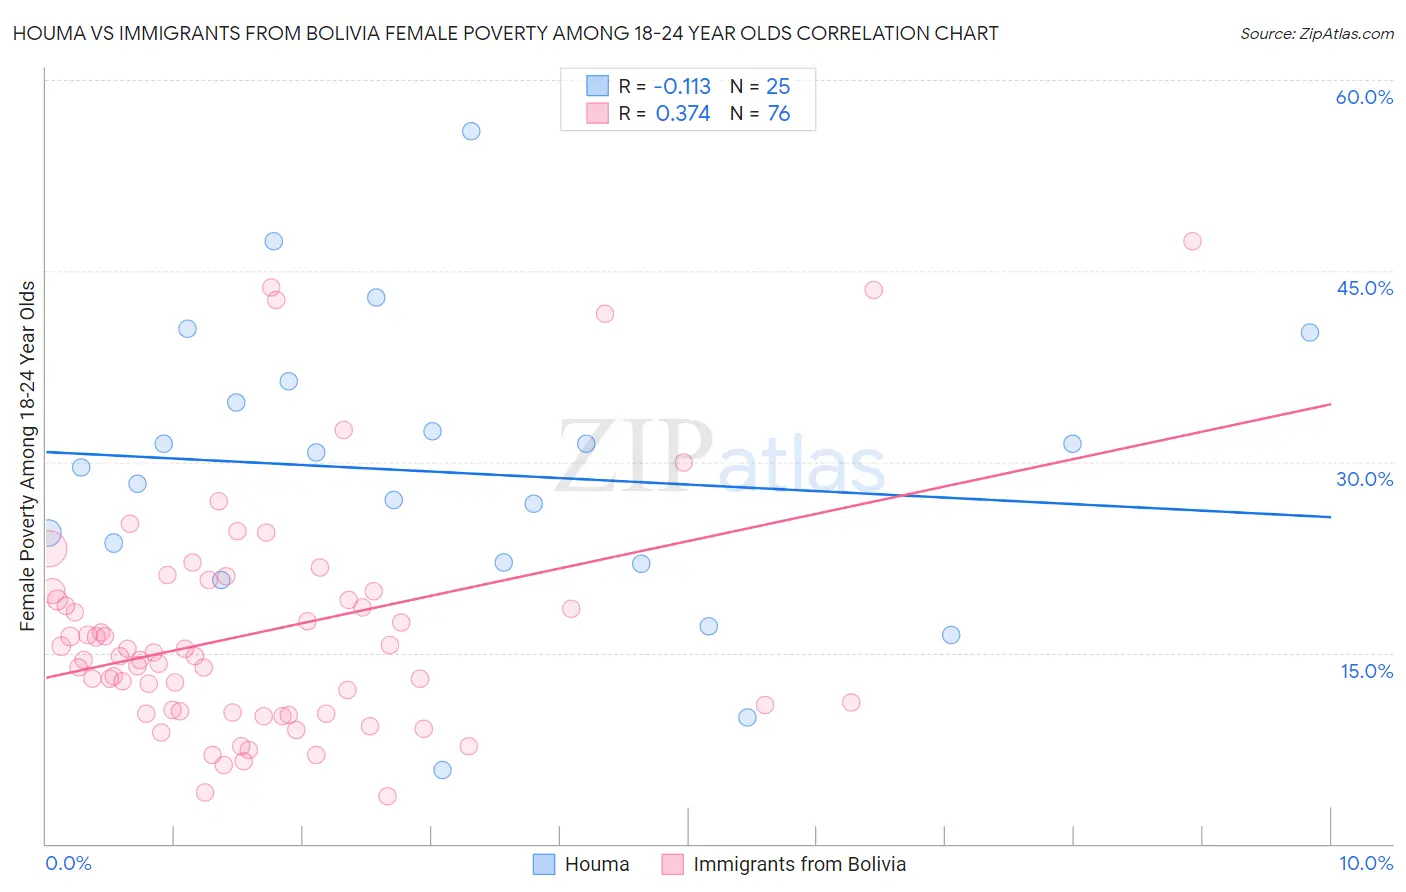 Houma vs Immigrants from Bolivia Female Poverty Among 18-24 Year Olds